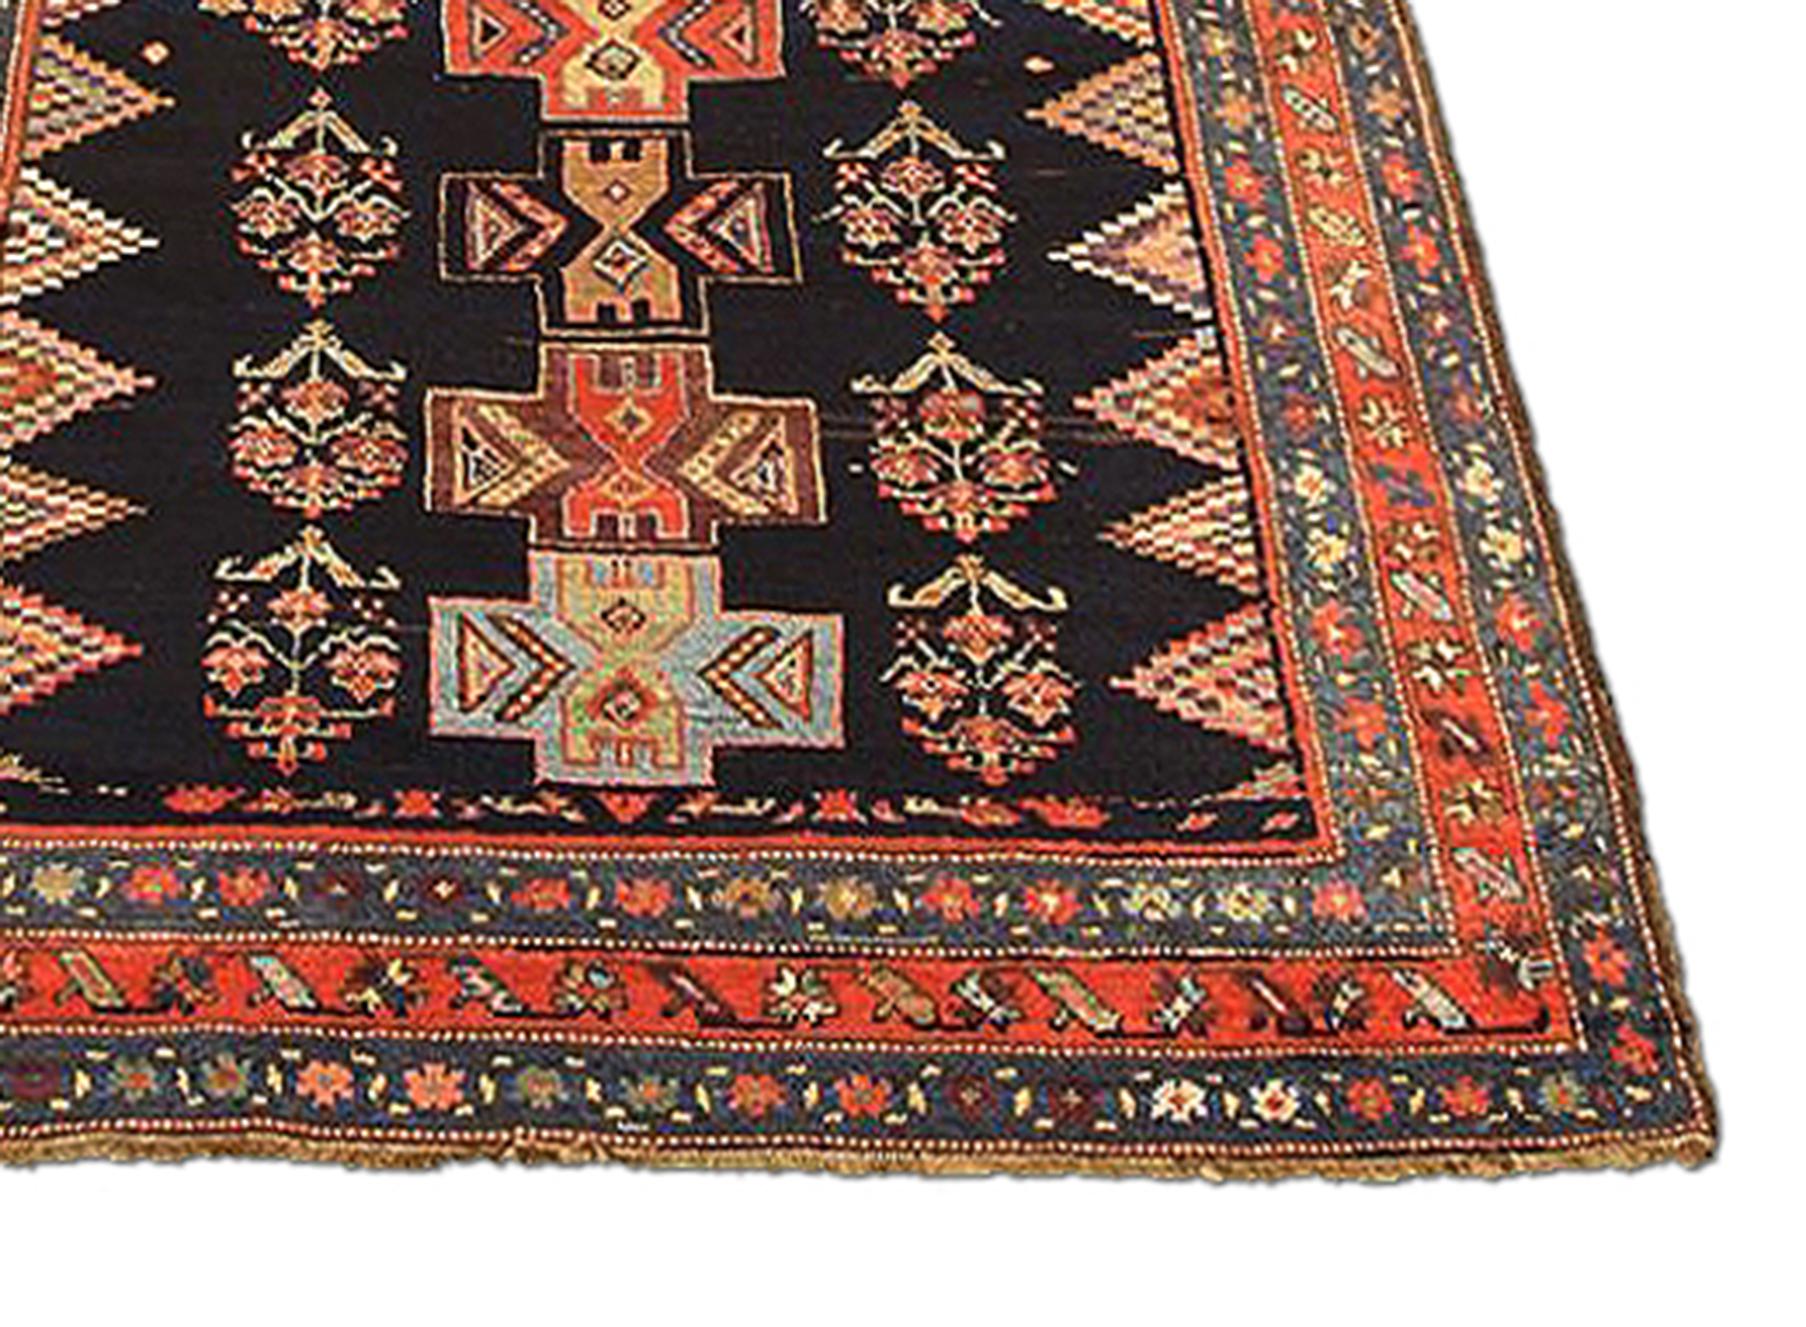 Islamic Antique Persian Bijar Runner Rug with Colored Cross and Flower Medallions